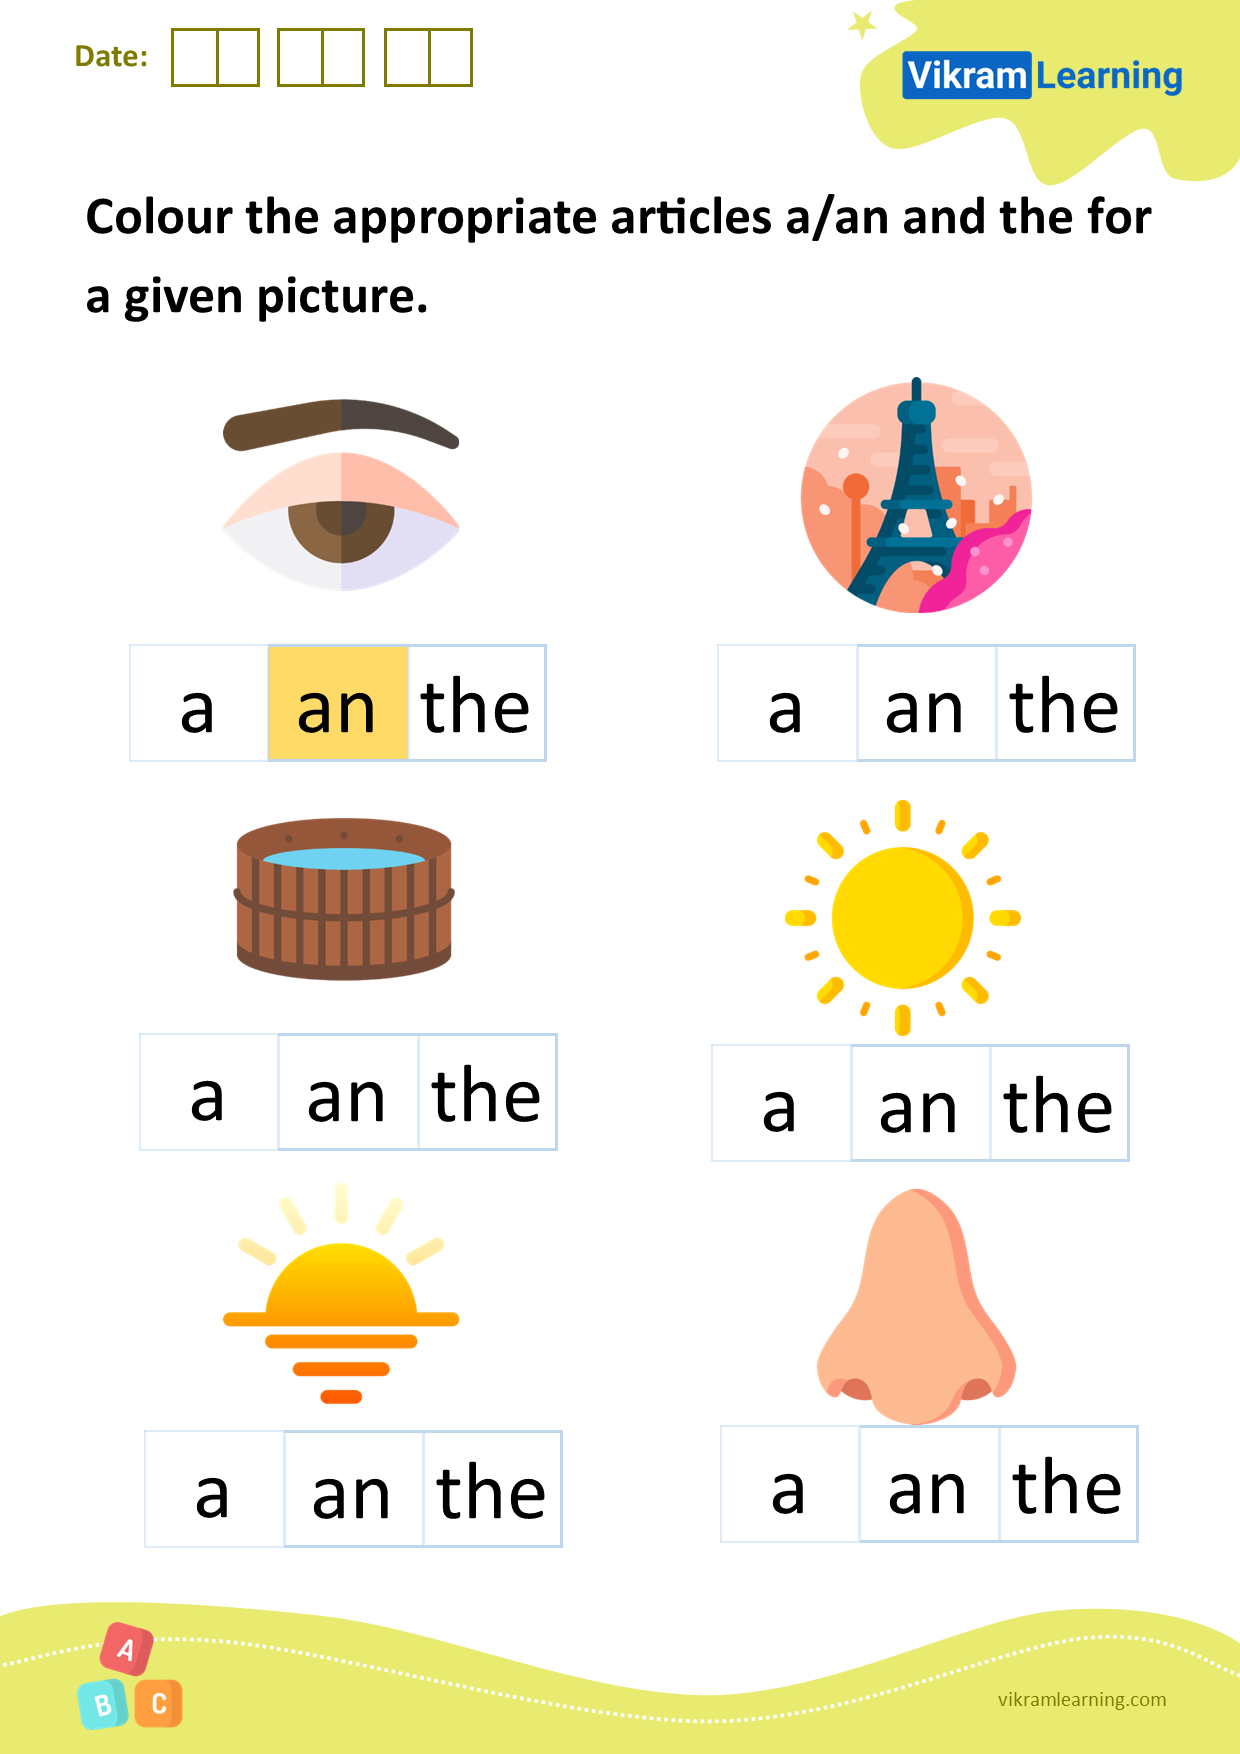 Download colour the appropriate articles a/an and the for a given picture worksheets